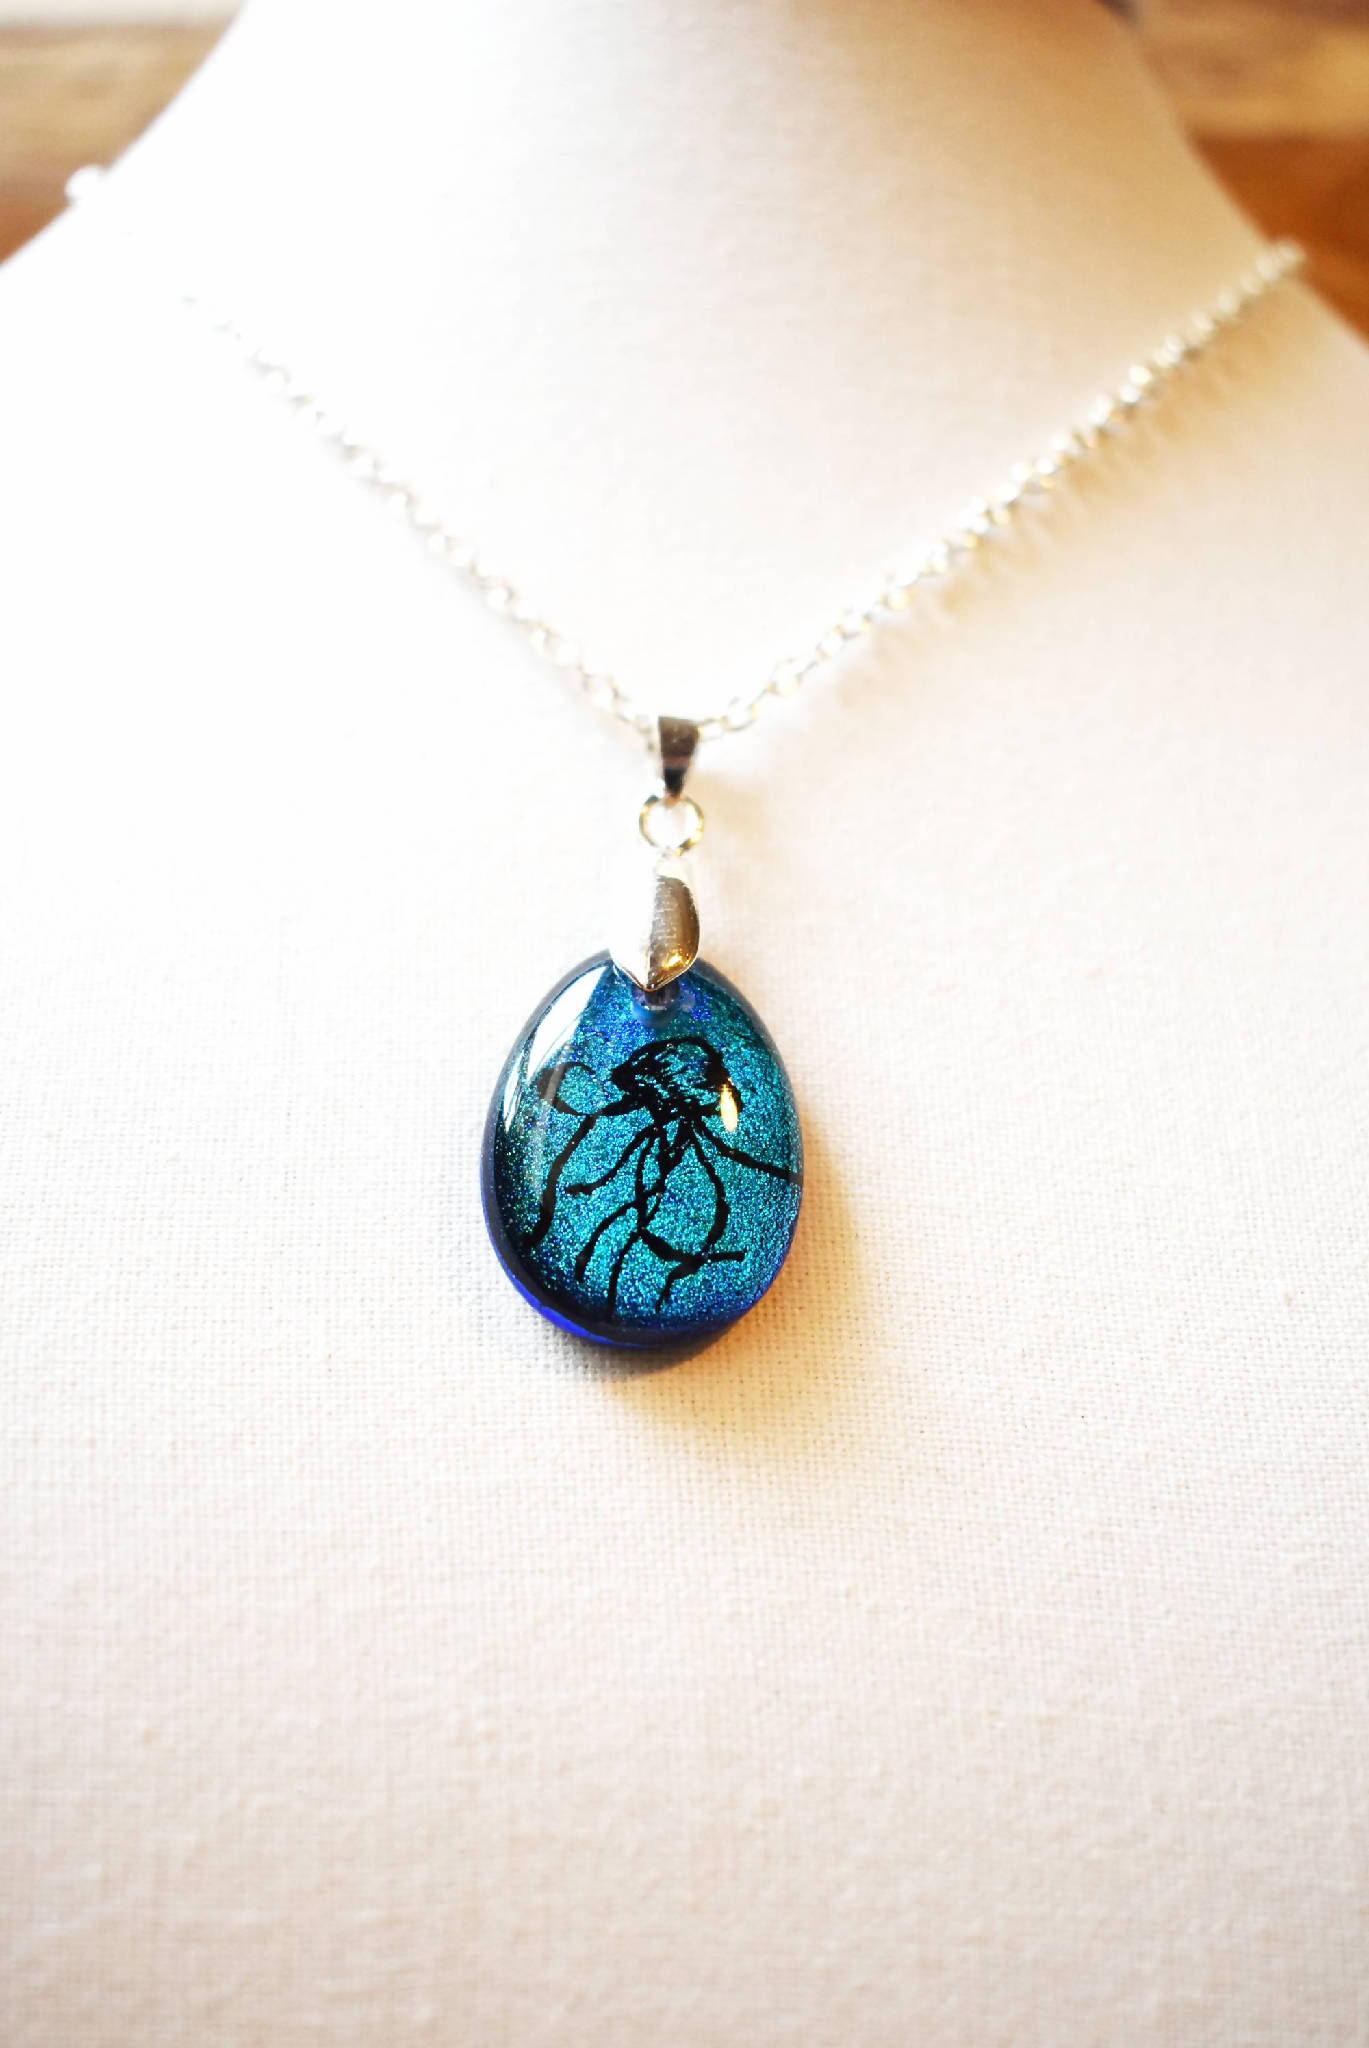 Sparkly Blue Glass Pendant and Silver Plated Chain. Handmade Jewellery Gift. Jellyfish Design.